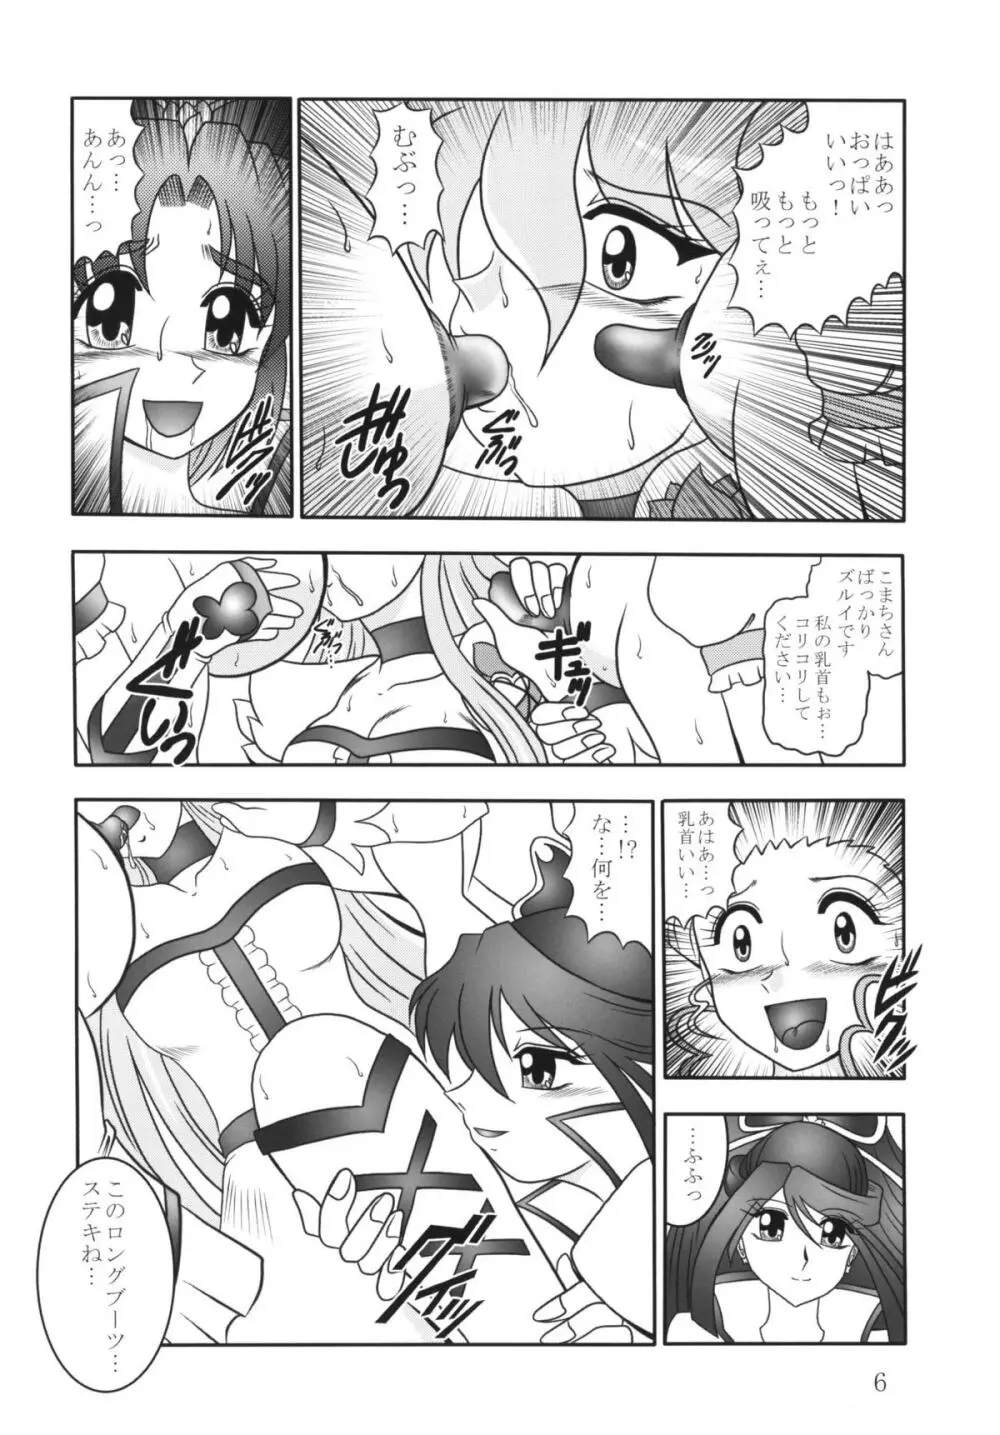 GREATEST ECLIPSE 蒼海～AbsoluteNEMESIS - page5